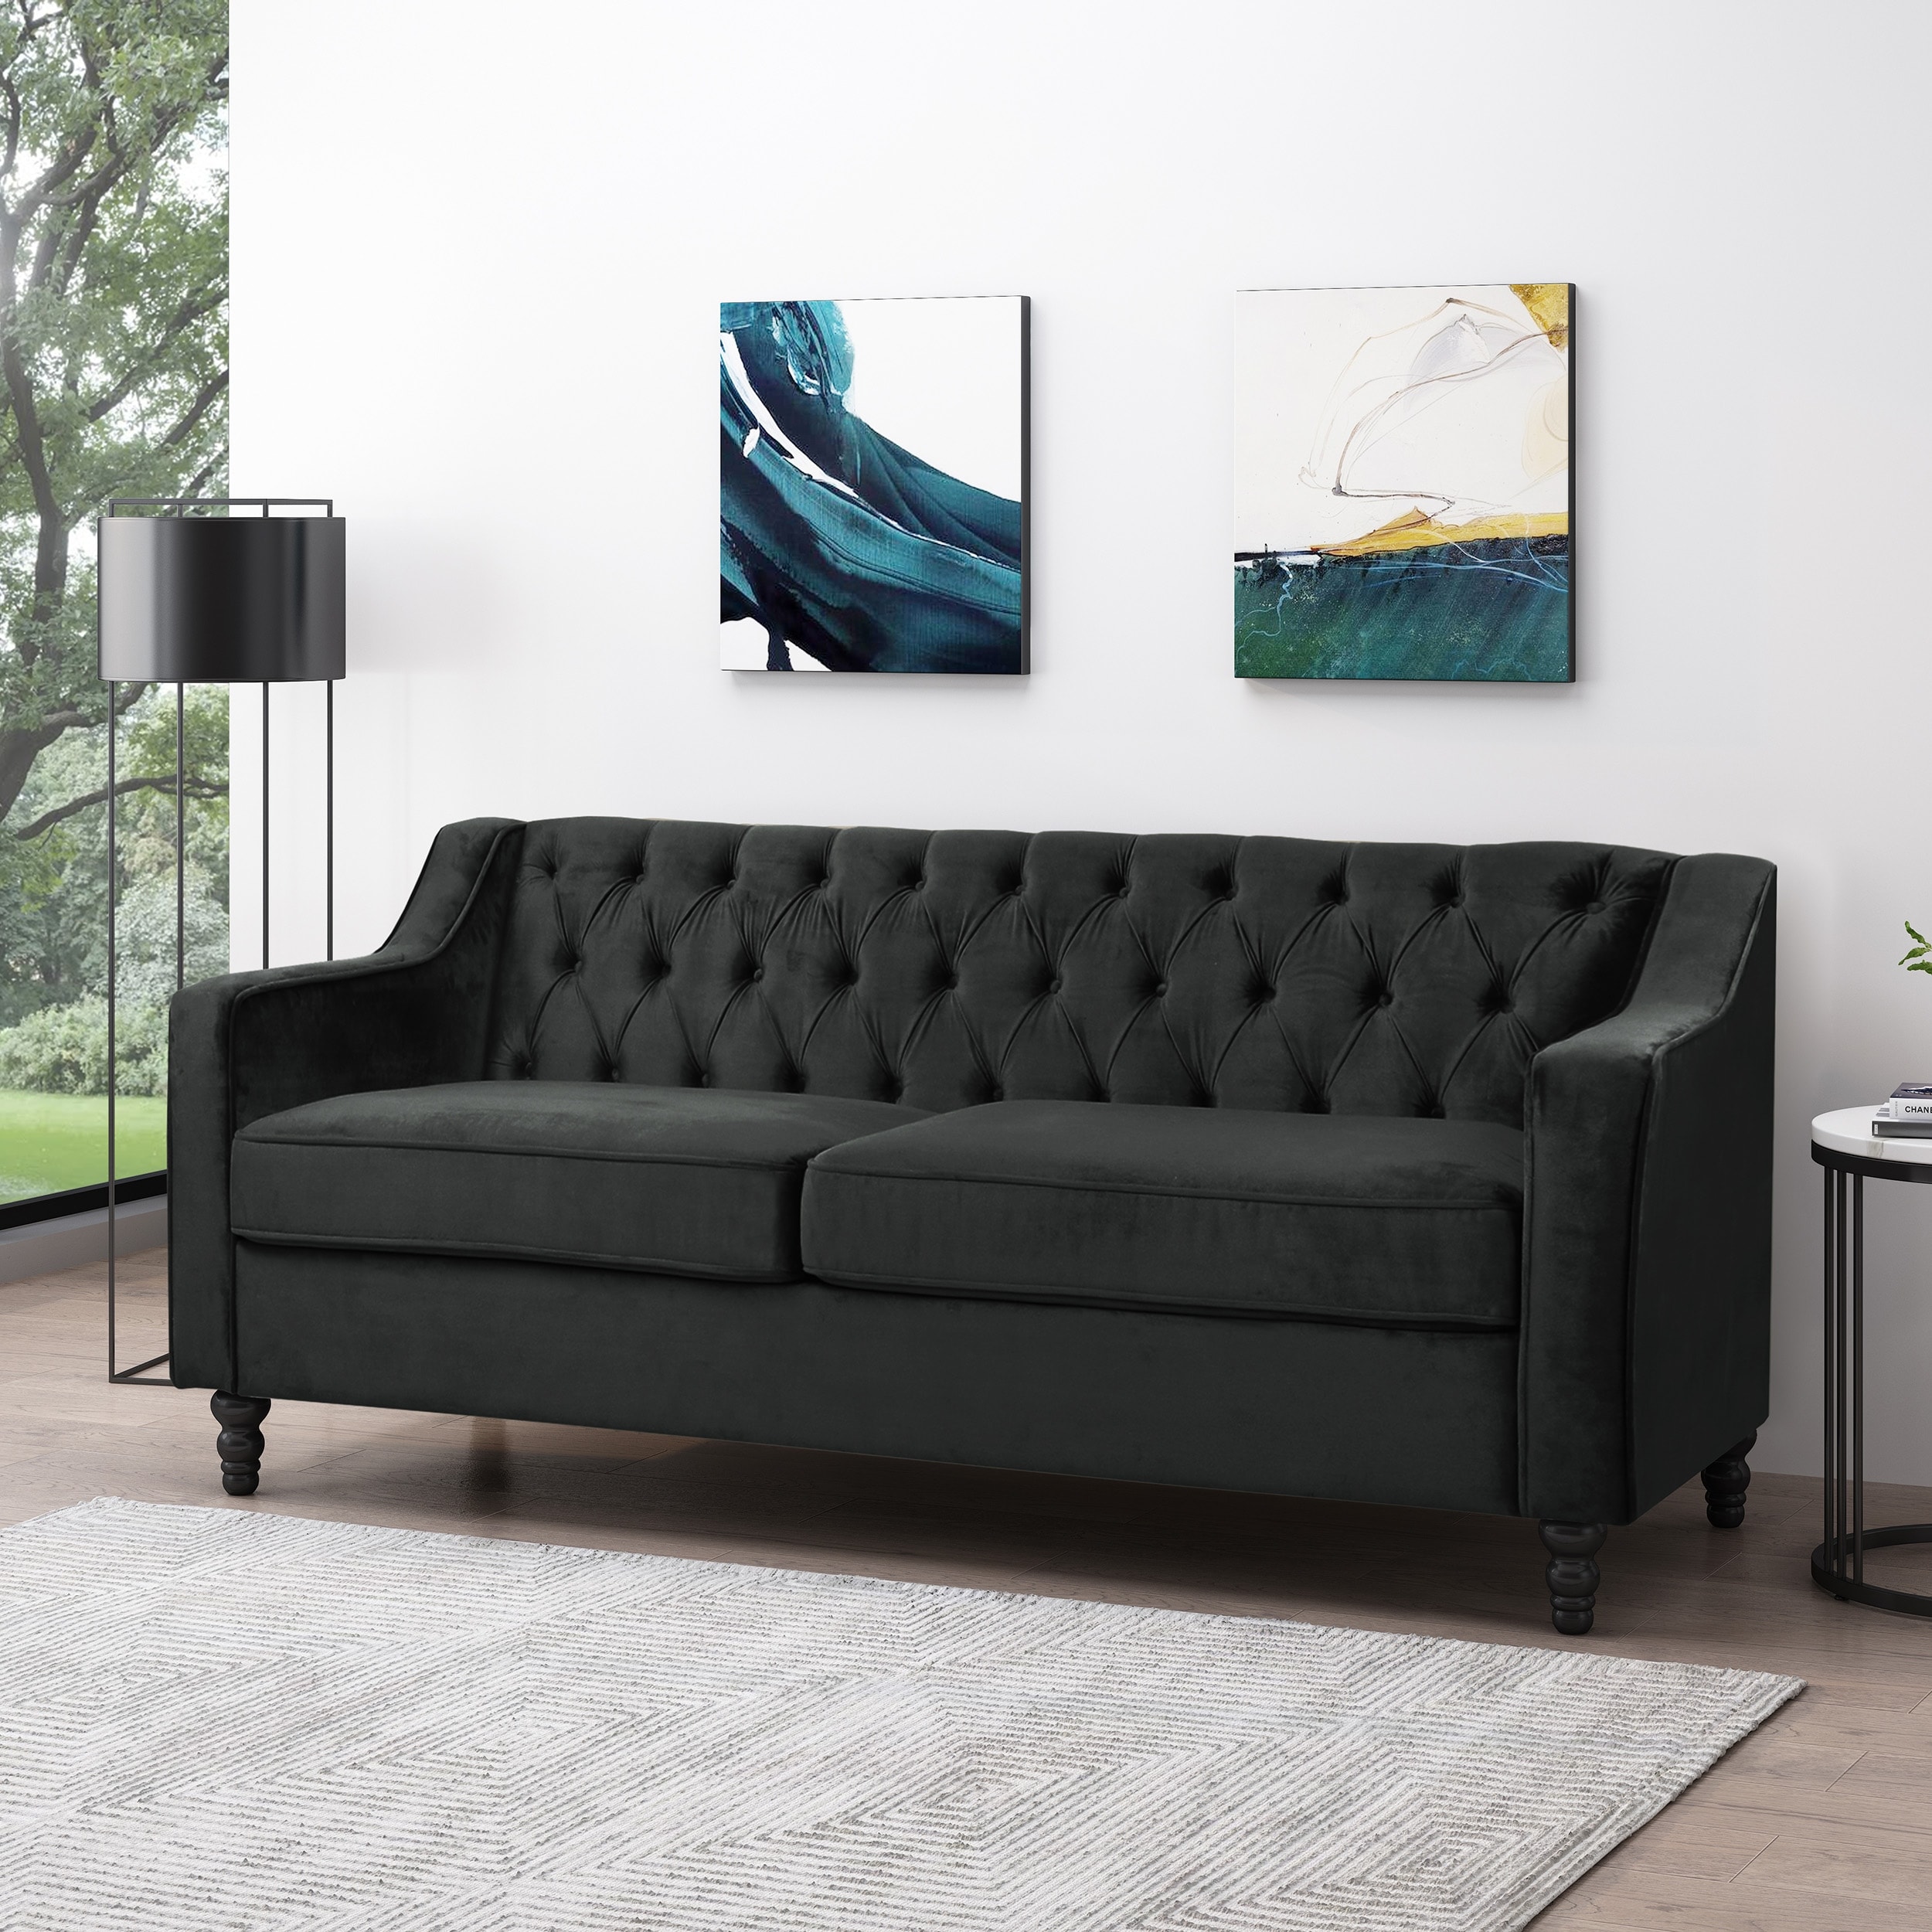 https://ak1.ostkcdn.com/images/products/is/images/direct/7ee3b8c1eb7912b00483bdda5de267e7b6eff7e4/Knouff-Modern-Glam-Tufted-Velvet-3-Seater-Sofa-by-Christopher-Knight-Home.jpg